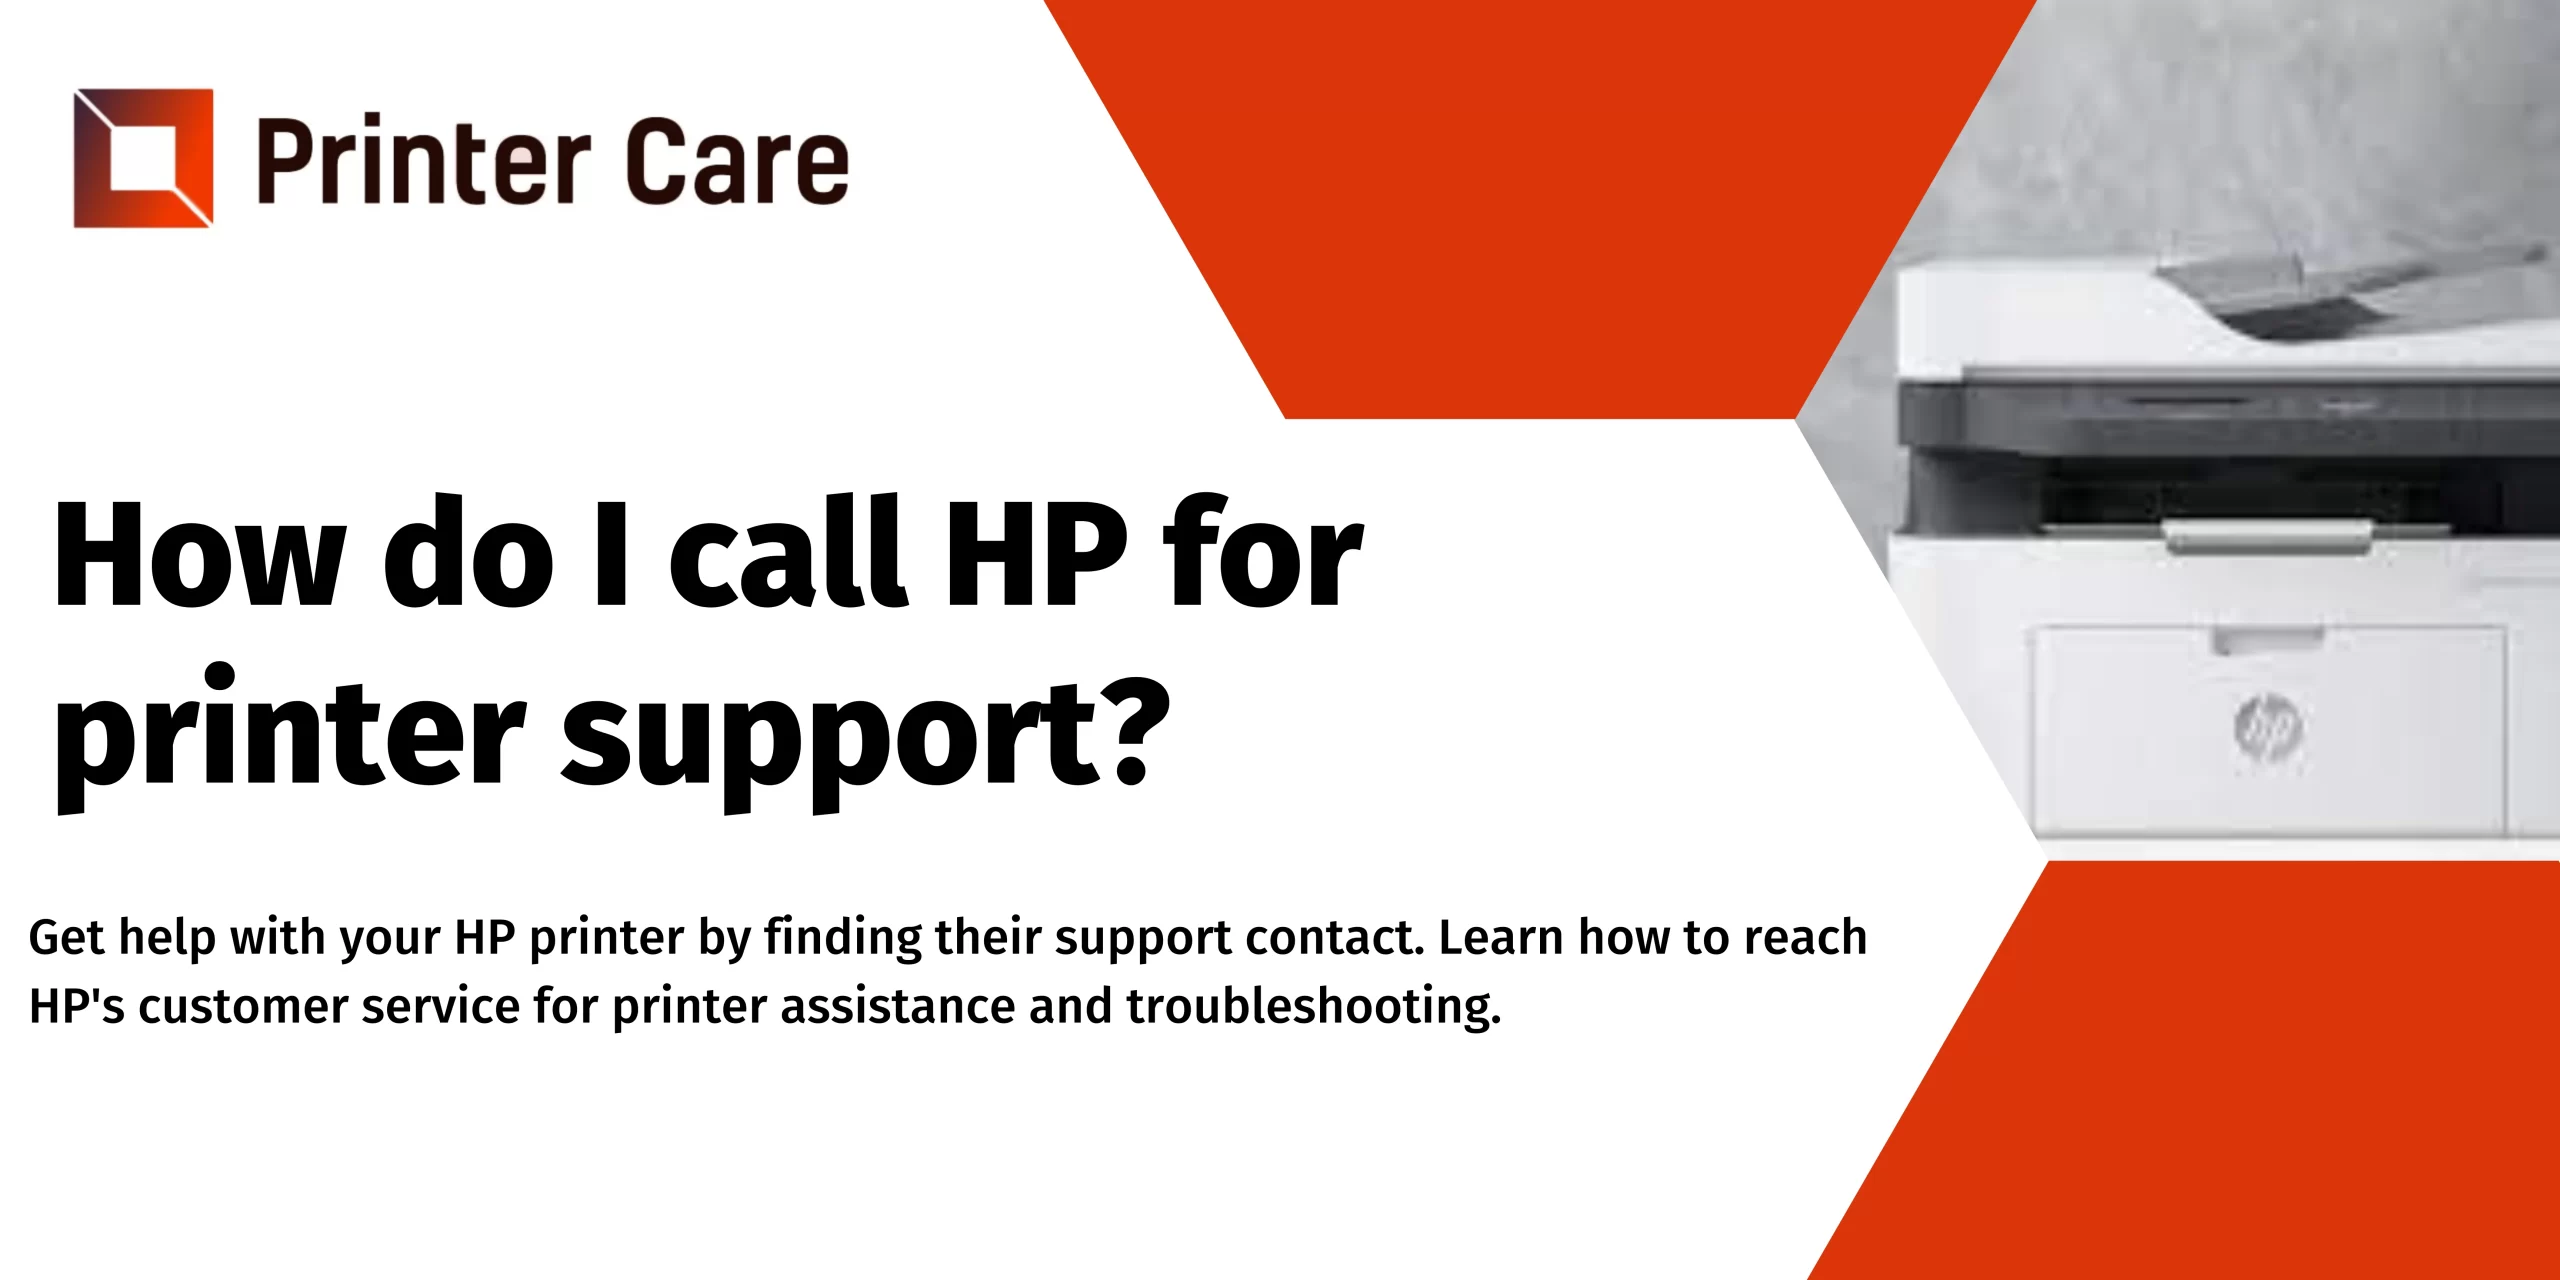 How do I call HP for printer support